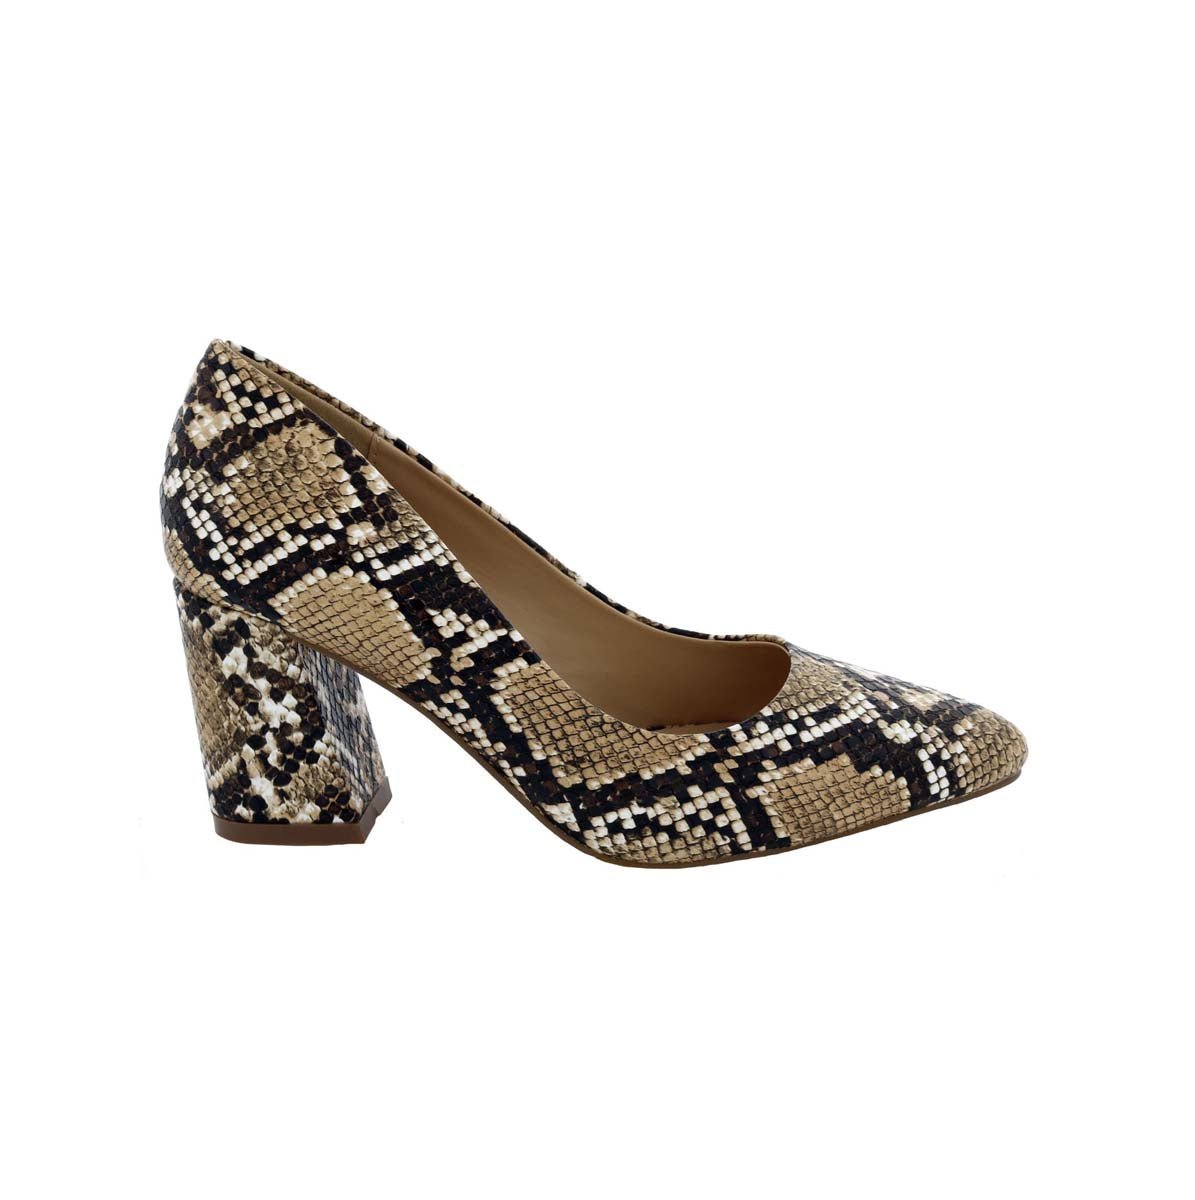 PENNY LOVES KENNY VENUS WOMEN PUMP SLIP-ON SHOES IN NATURAL FAUX SNAKE - TLW Shoes